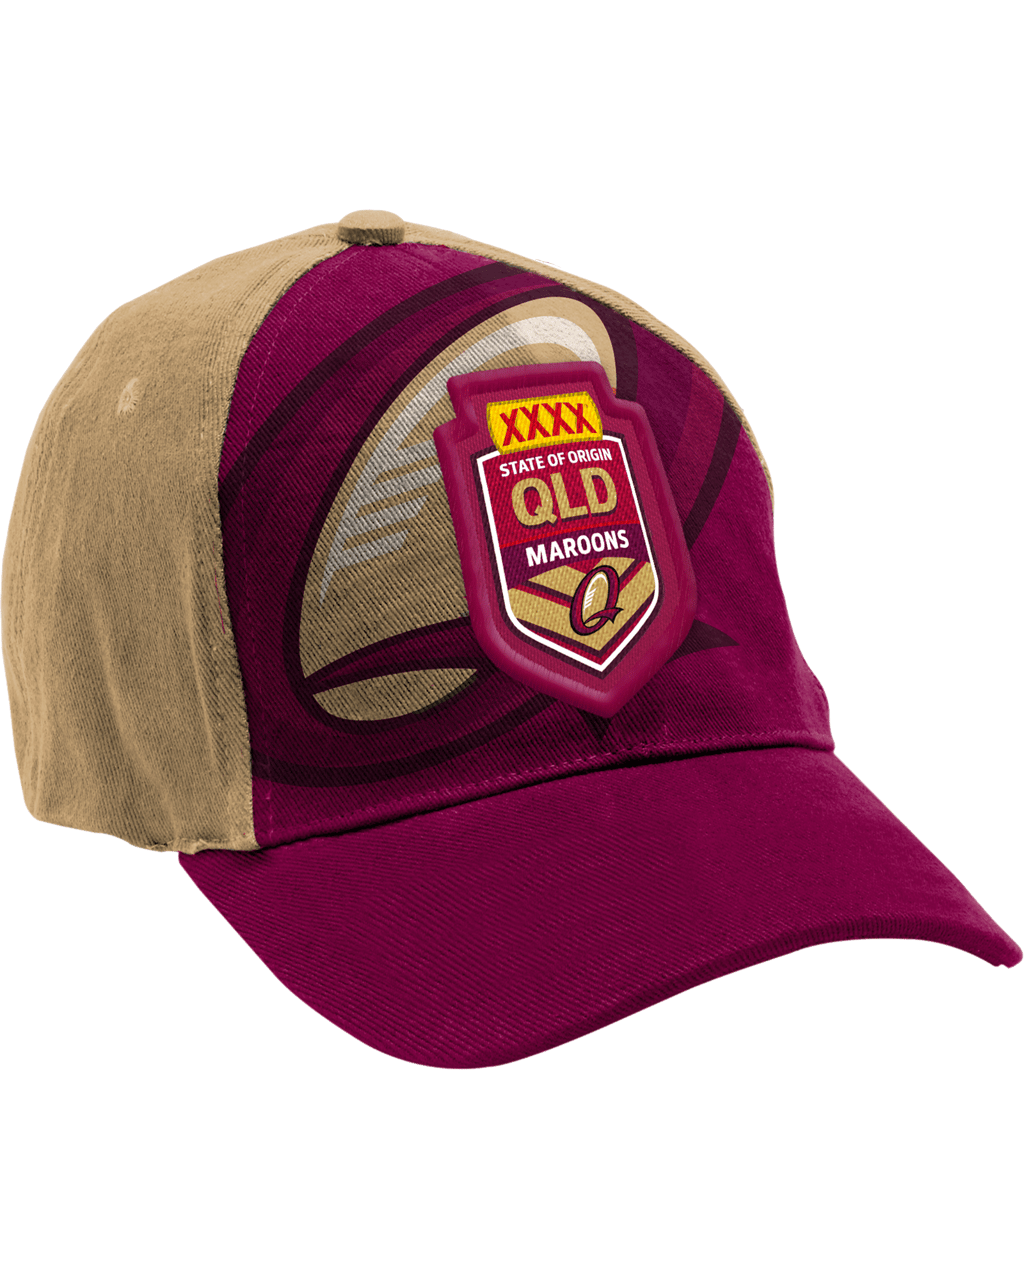 Details about   Queensland Maroons QLD Maroons NRL State Of Origin Chevron Cap/Hat! 